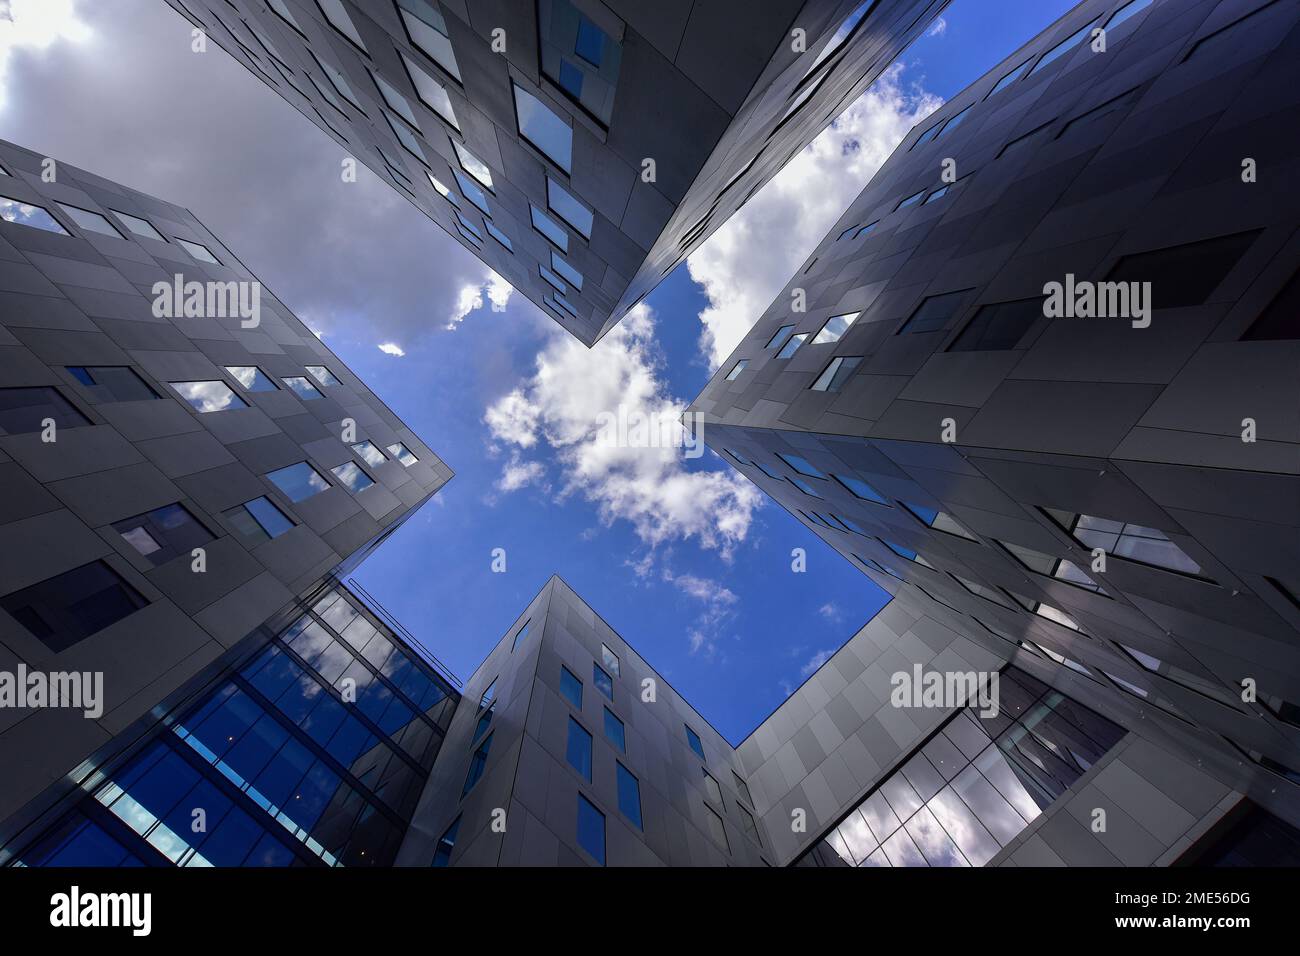 Netherlands, North Holland, Amsterdam, Directly below view of sky over gray modern buildings Stock Photo